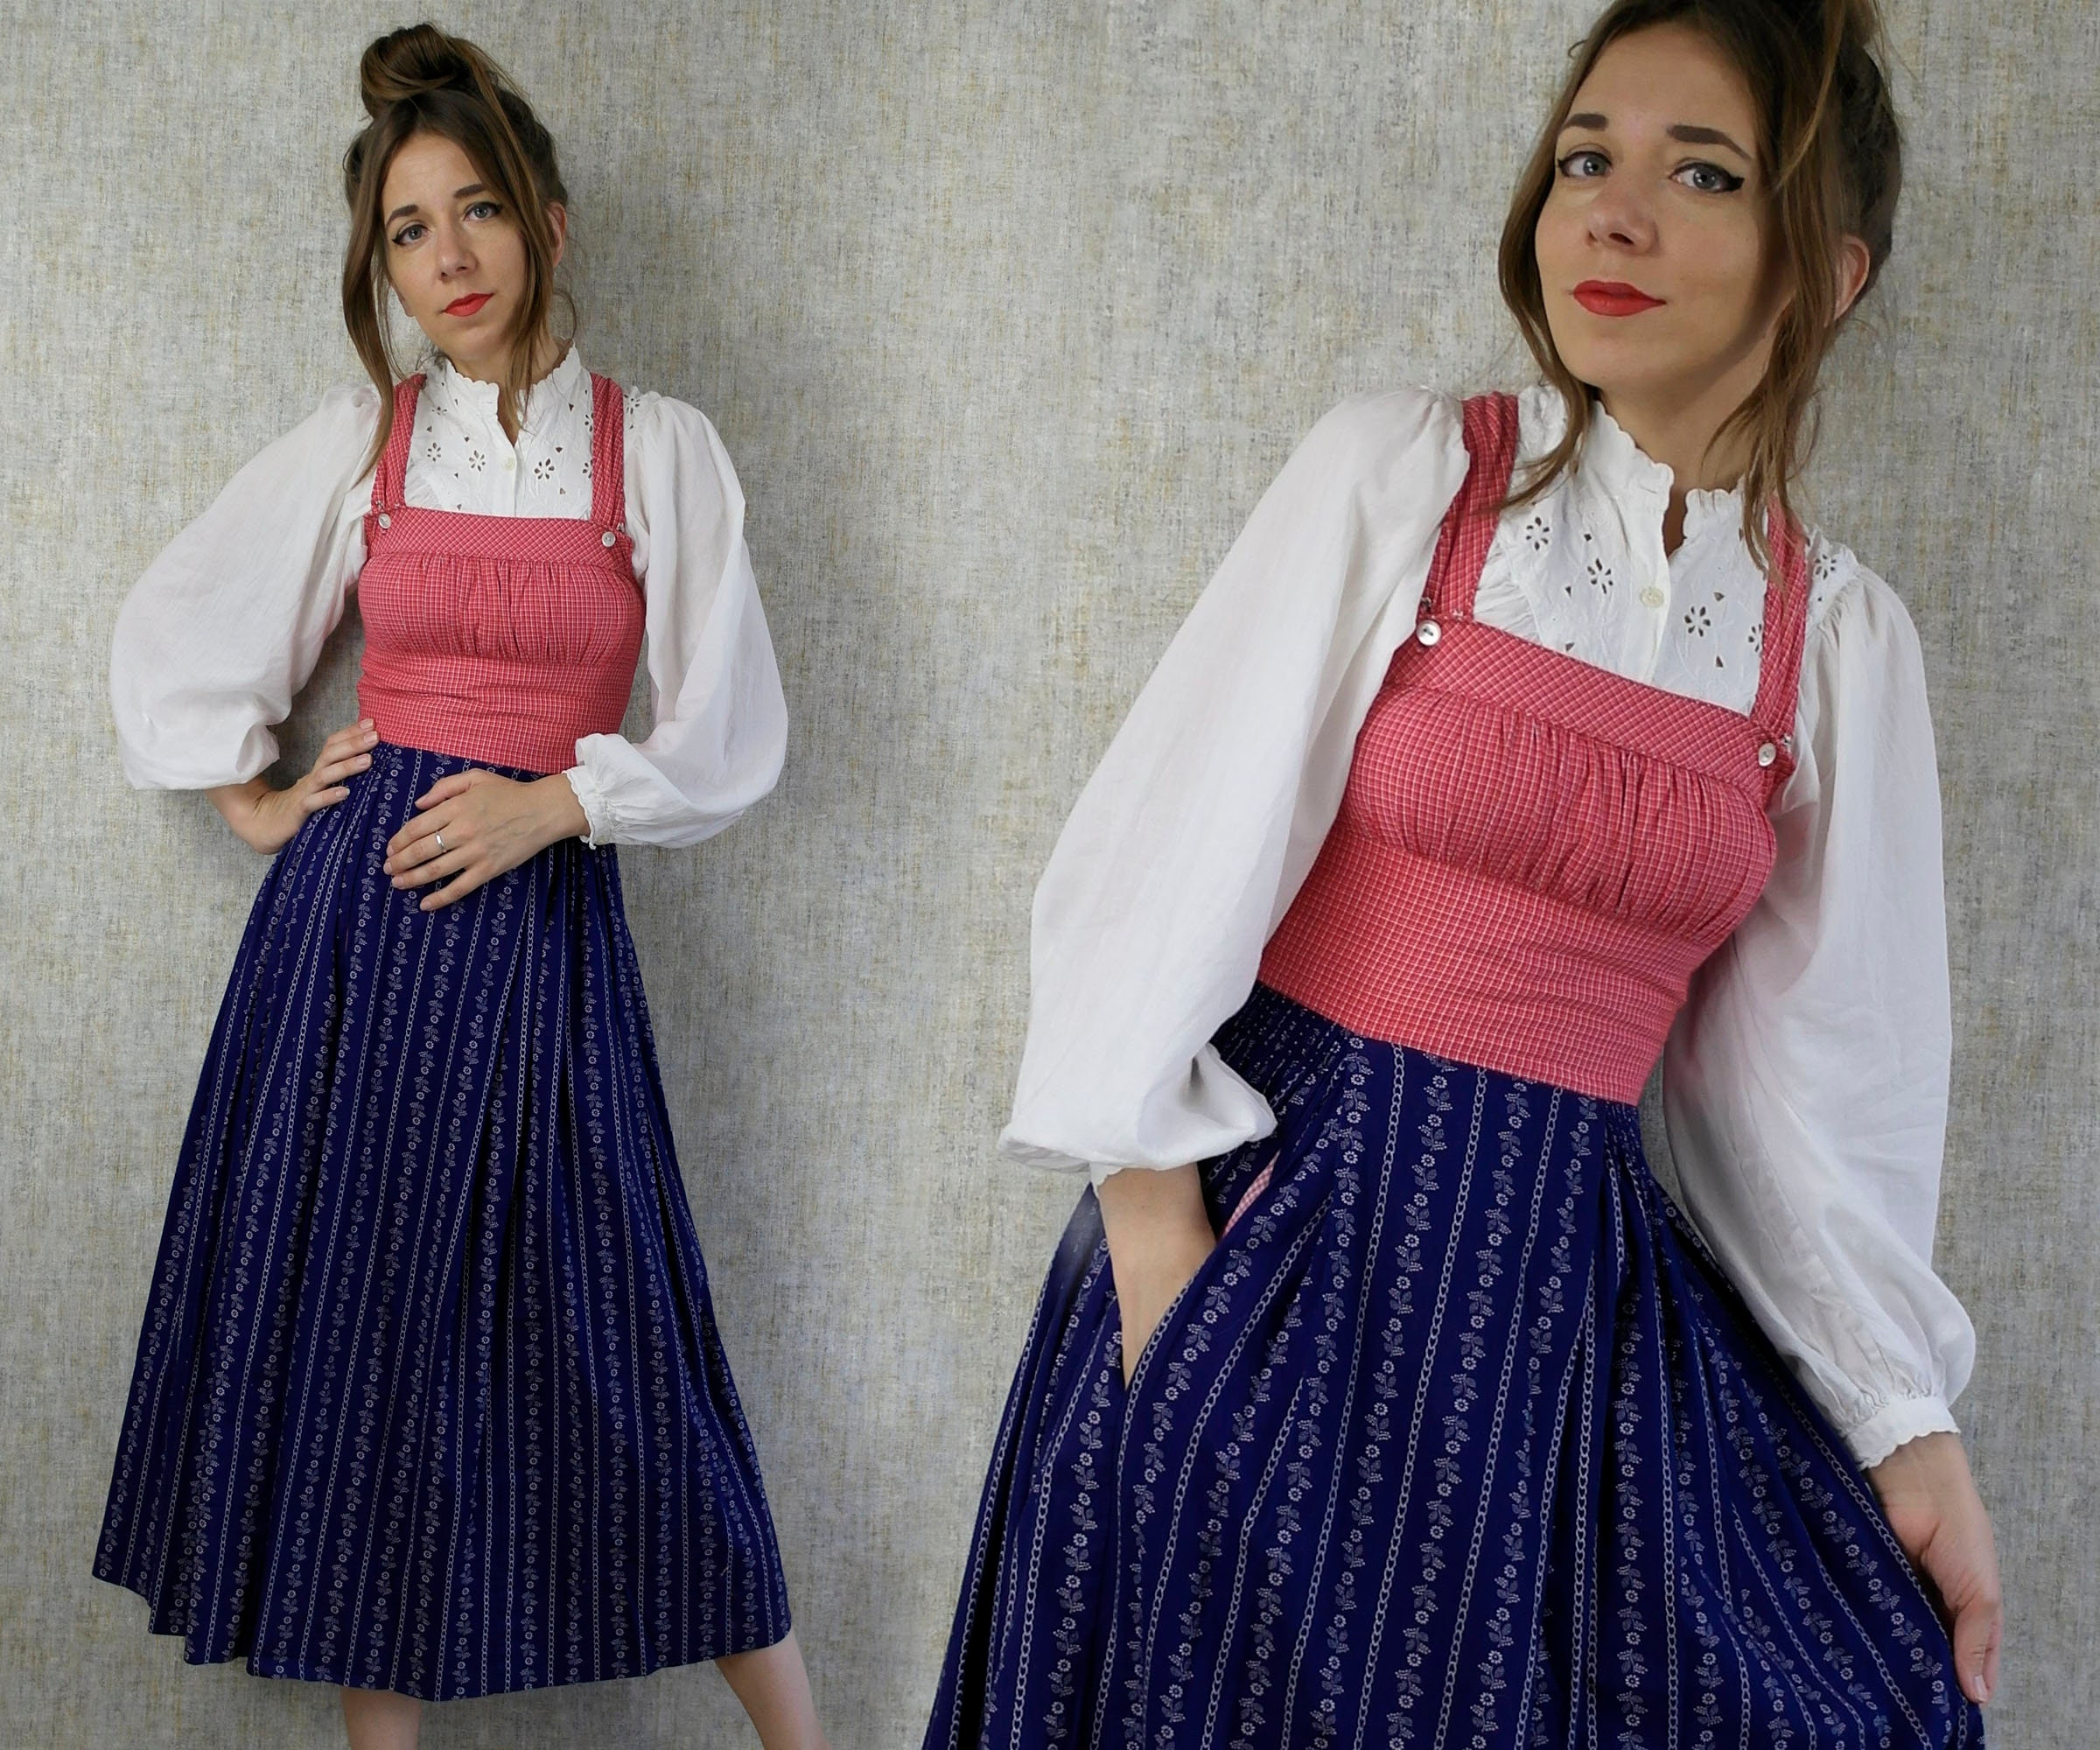 Fuchs Trachtenmoden Dirndl check pattern classic style Fashion Traditional Dresses Dirndl 